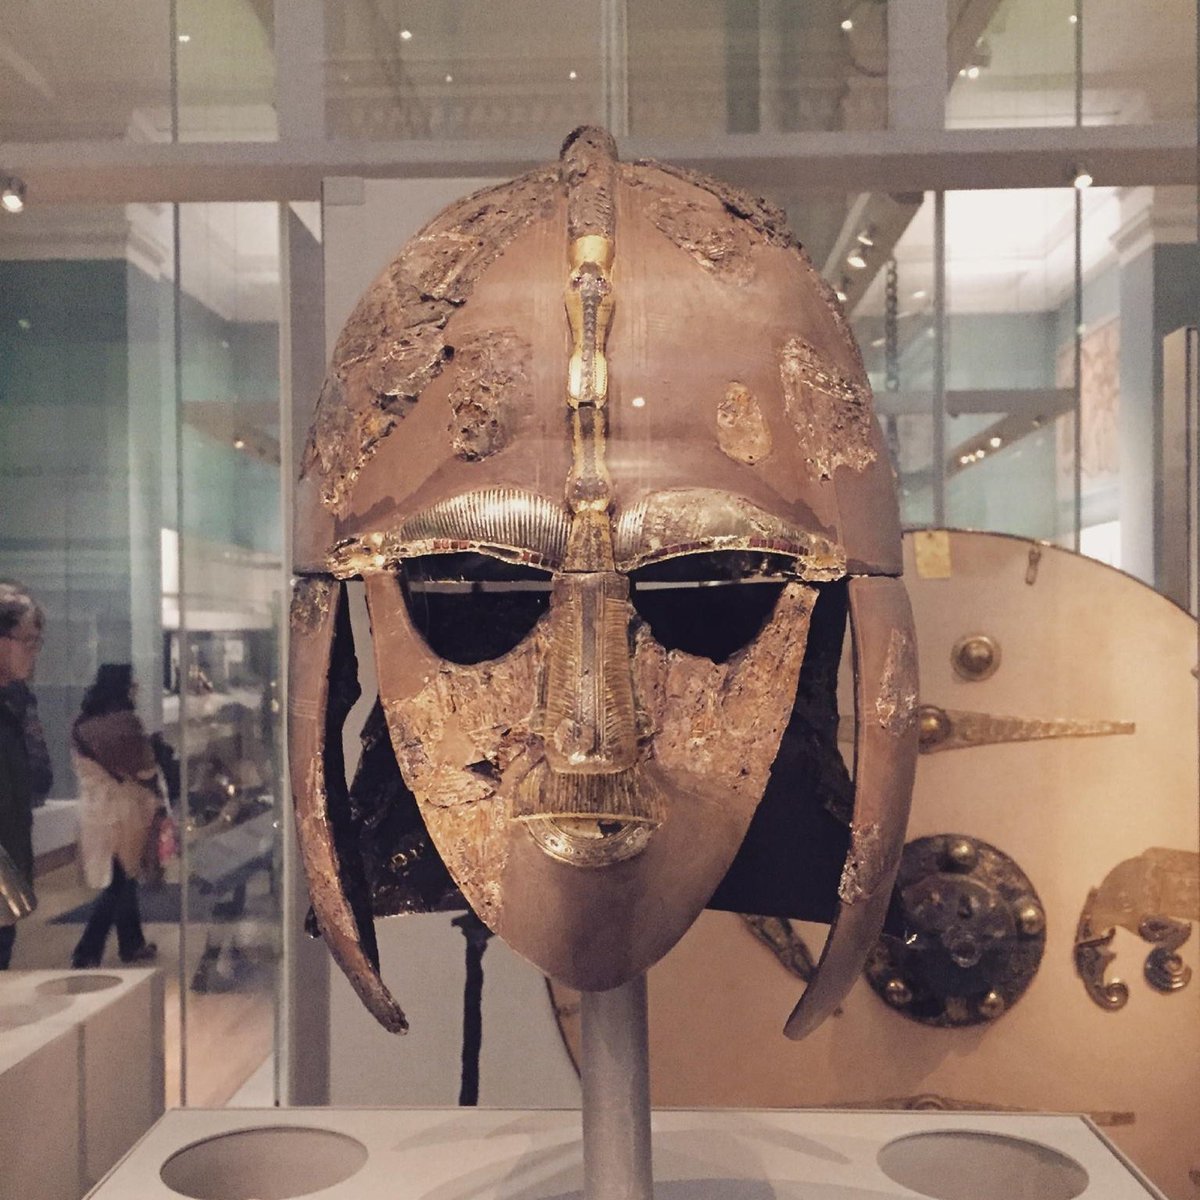 Since the Sutton Hoo film 'The Dig' came out today I thought I'd focus my  #earlyenglishqueens thread on the wife of King Raedwald of East Anglia! We know of Raedwald's wife through Bede: though she is not named she is important to his narrative of the conversion to Christianity